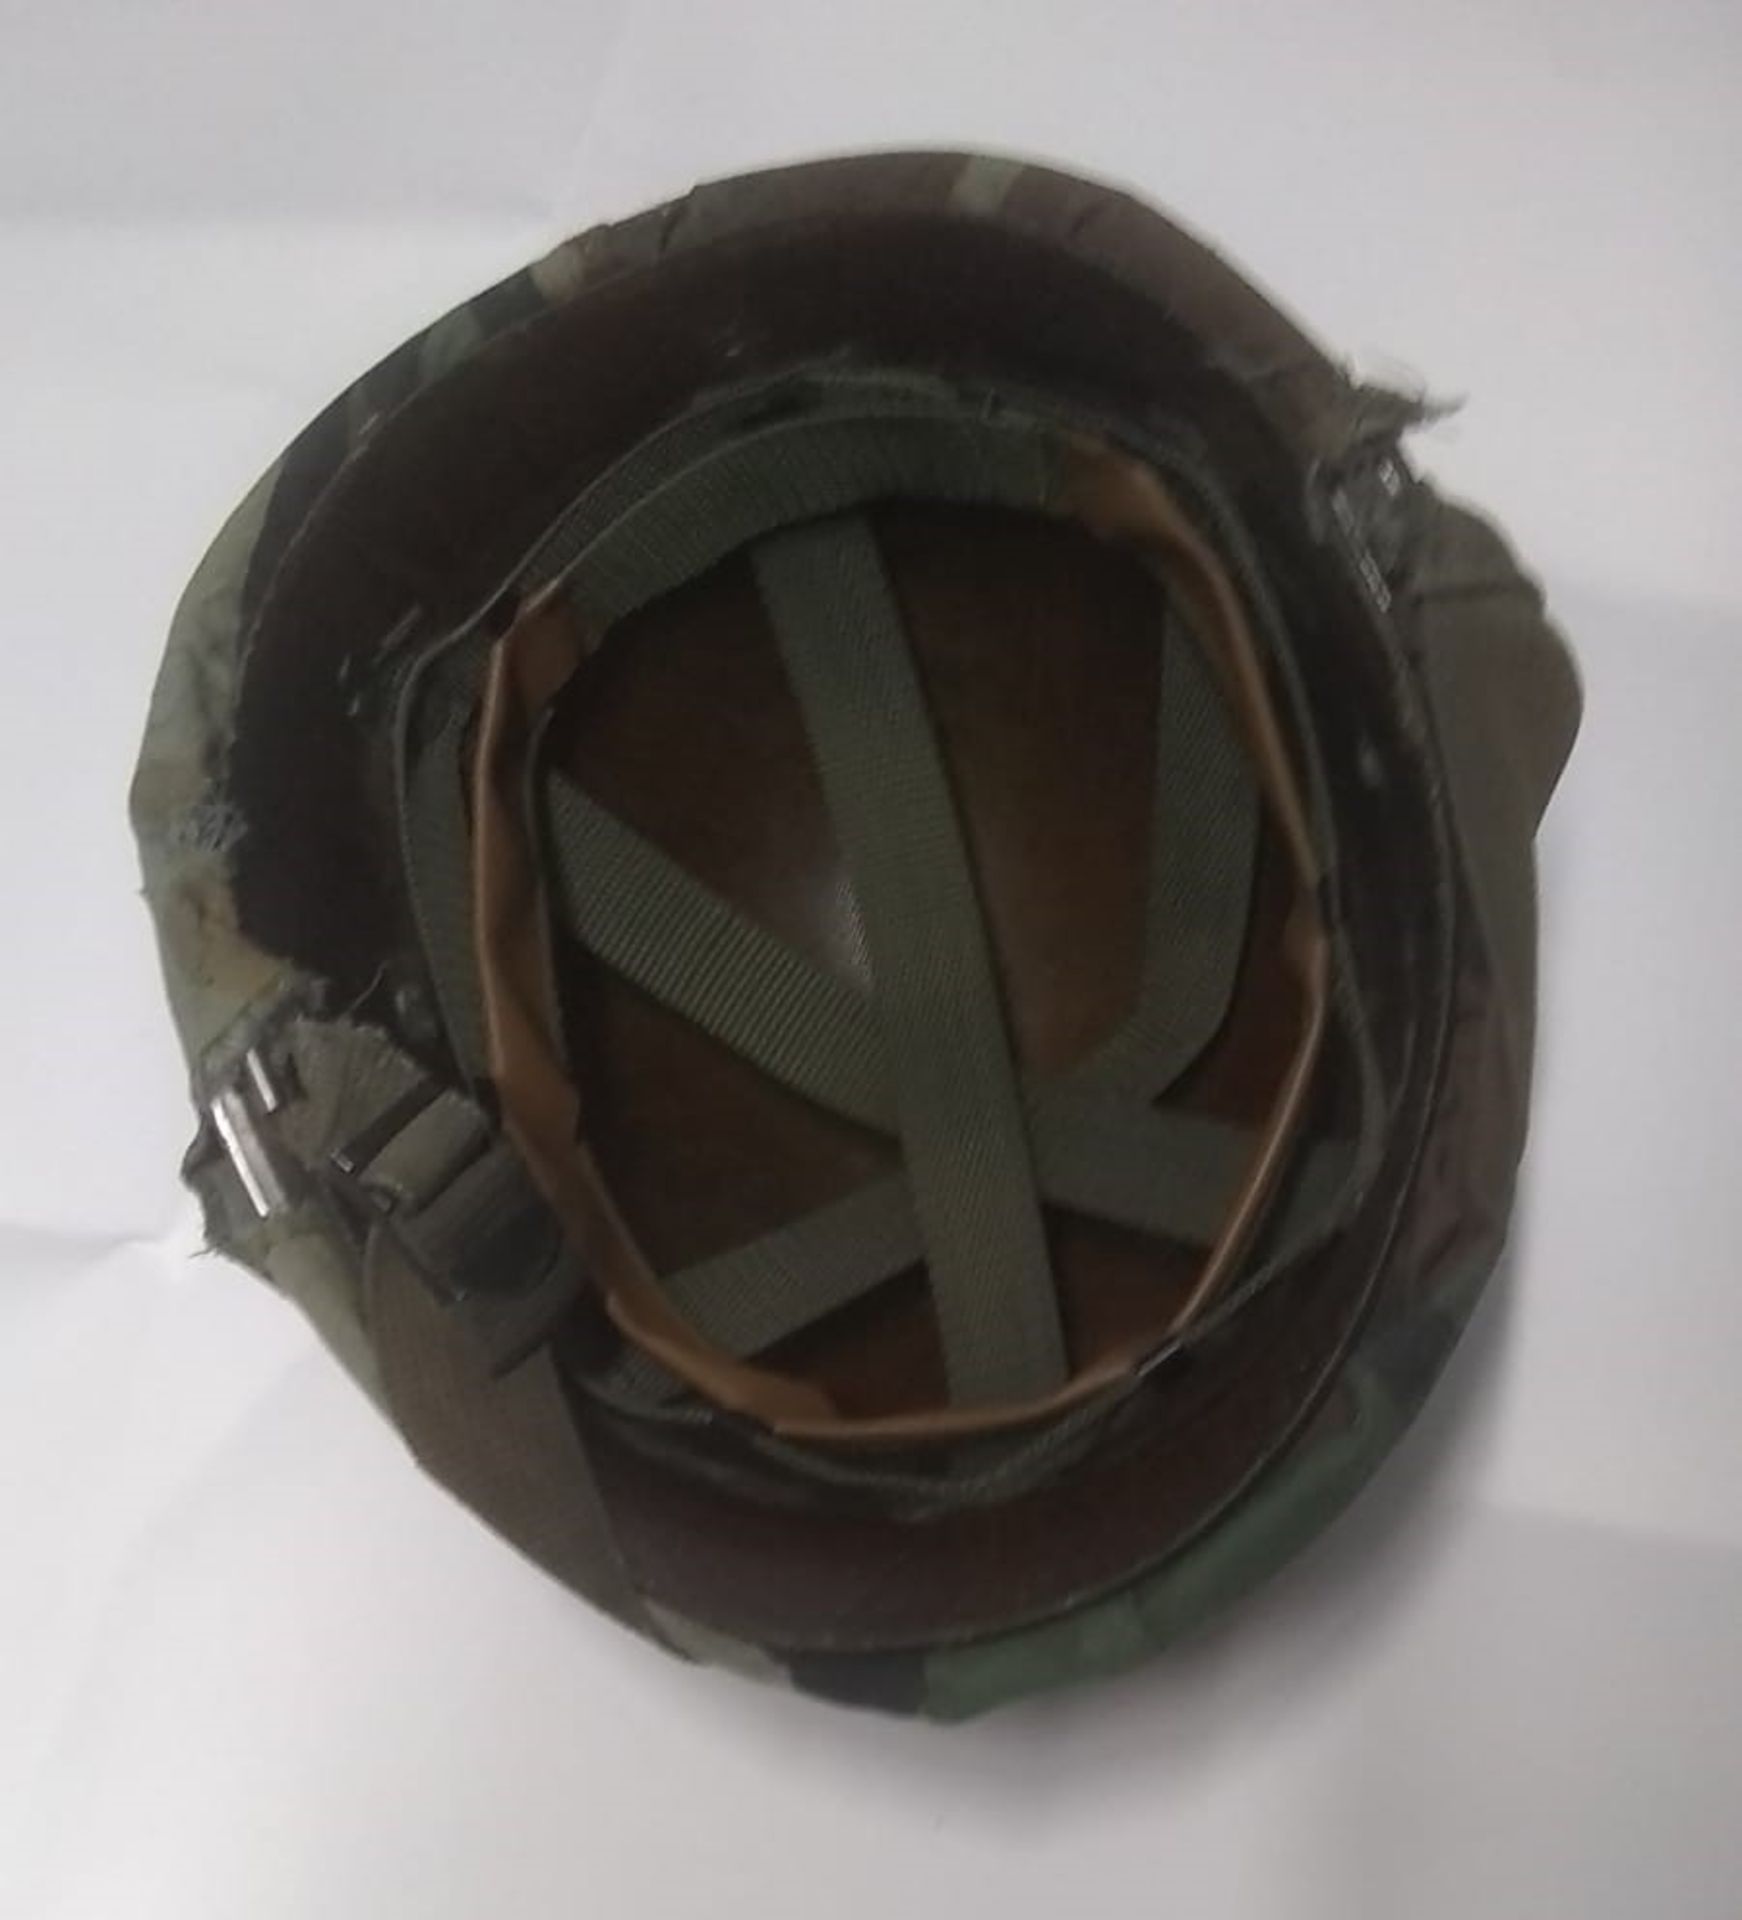 A 1980's US M1 helmet with liner and woo - Image 2 of 3